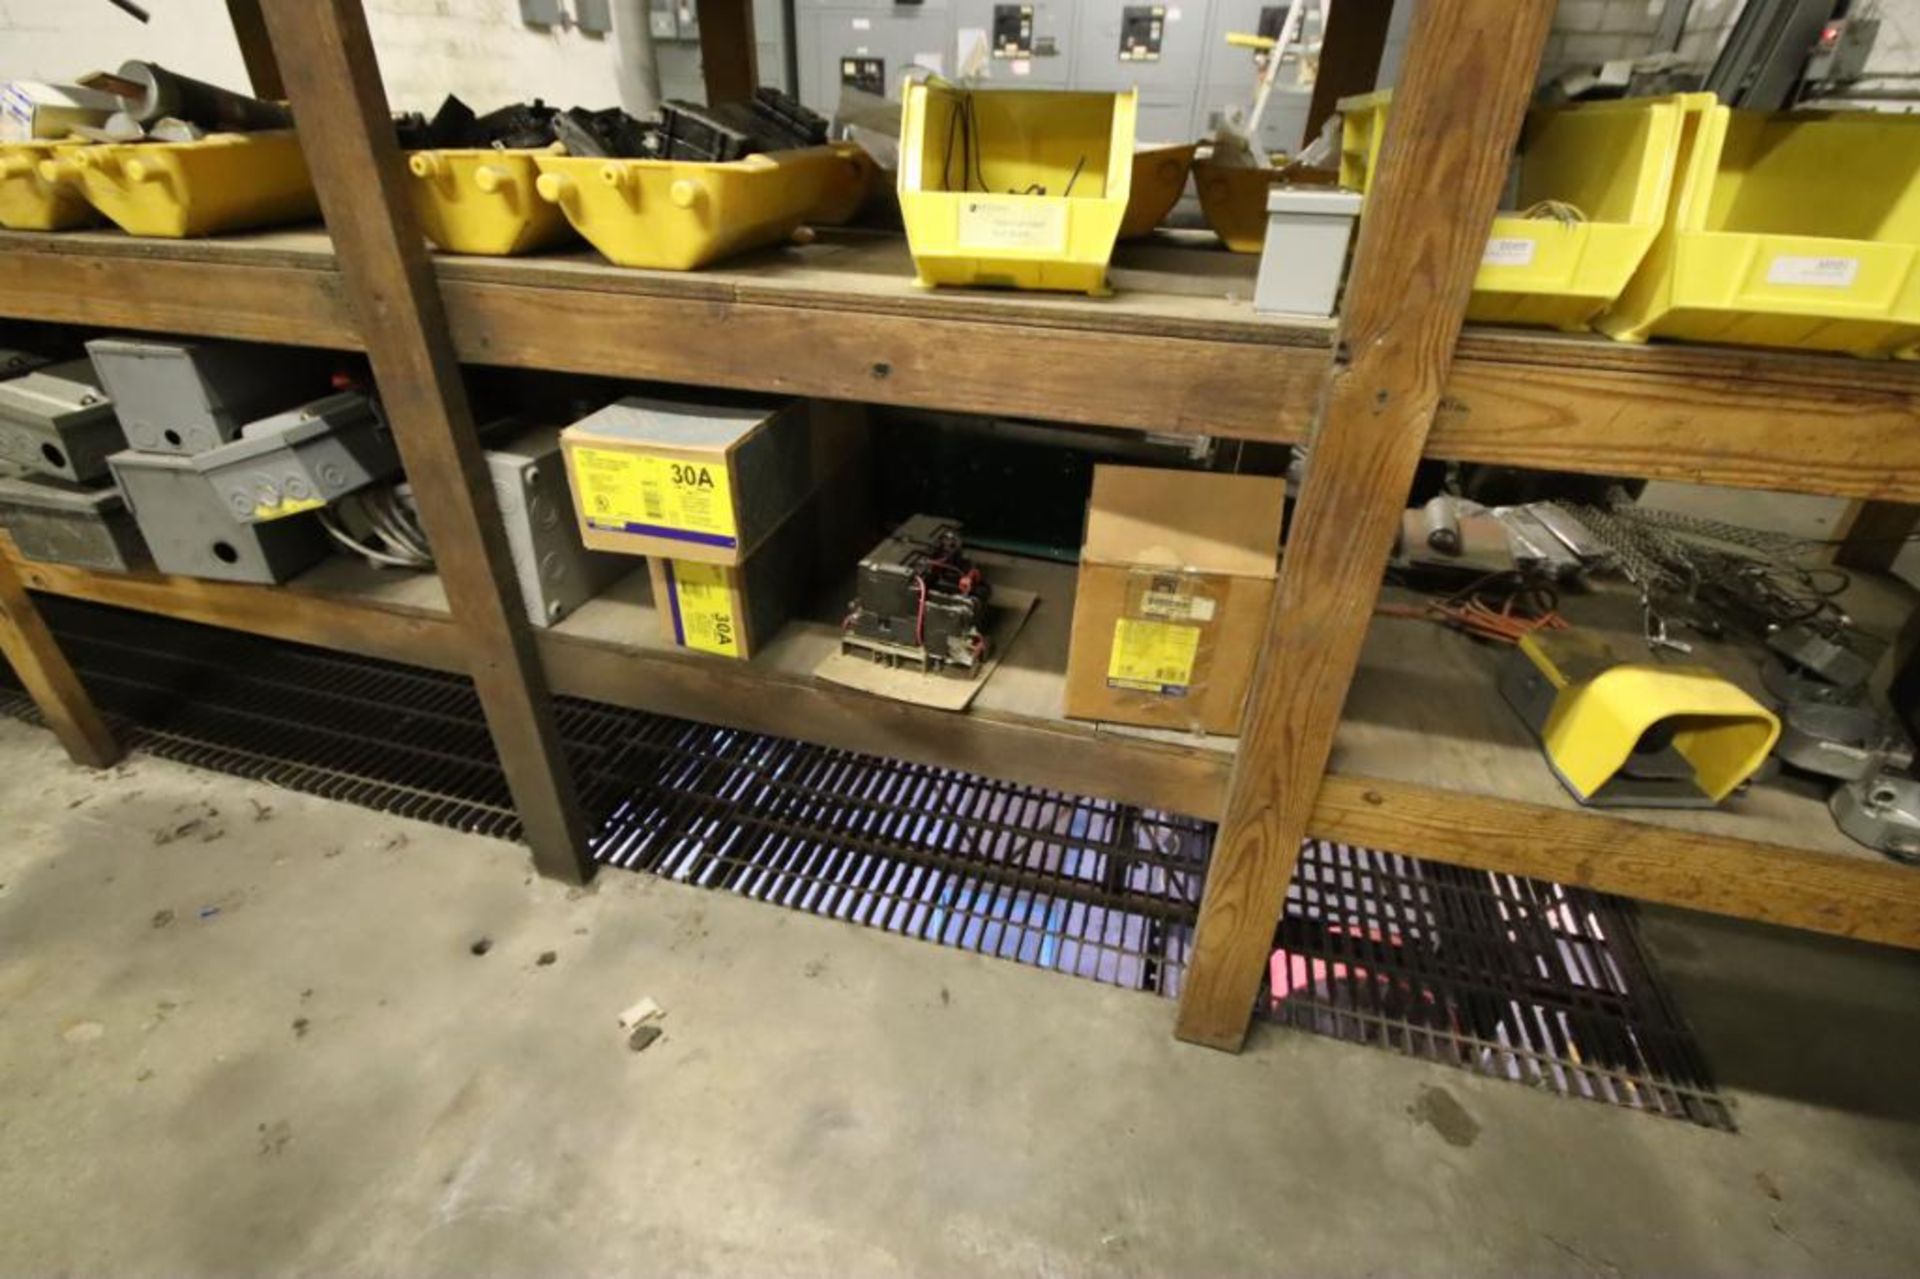 Contents on Wooden Shelf-Electrical Boxes, Wire Conduit Clamps, Fuses, Safety Switches, Etc. (On Sec - Image 7 of 11